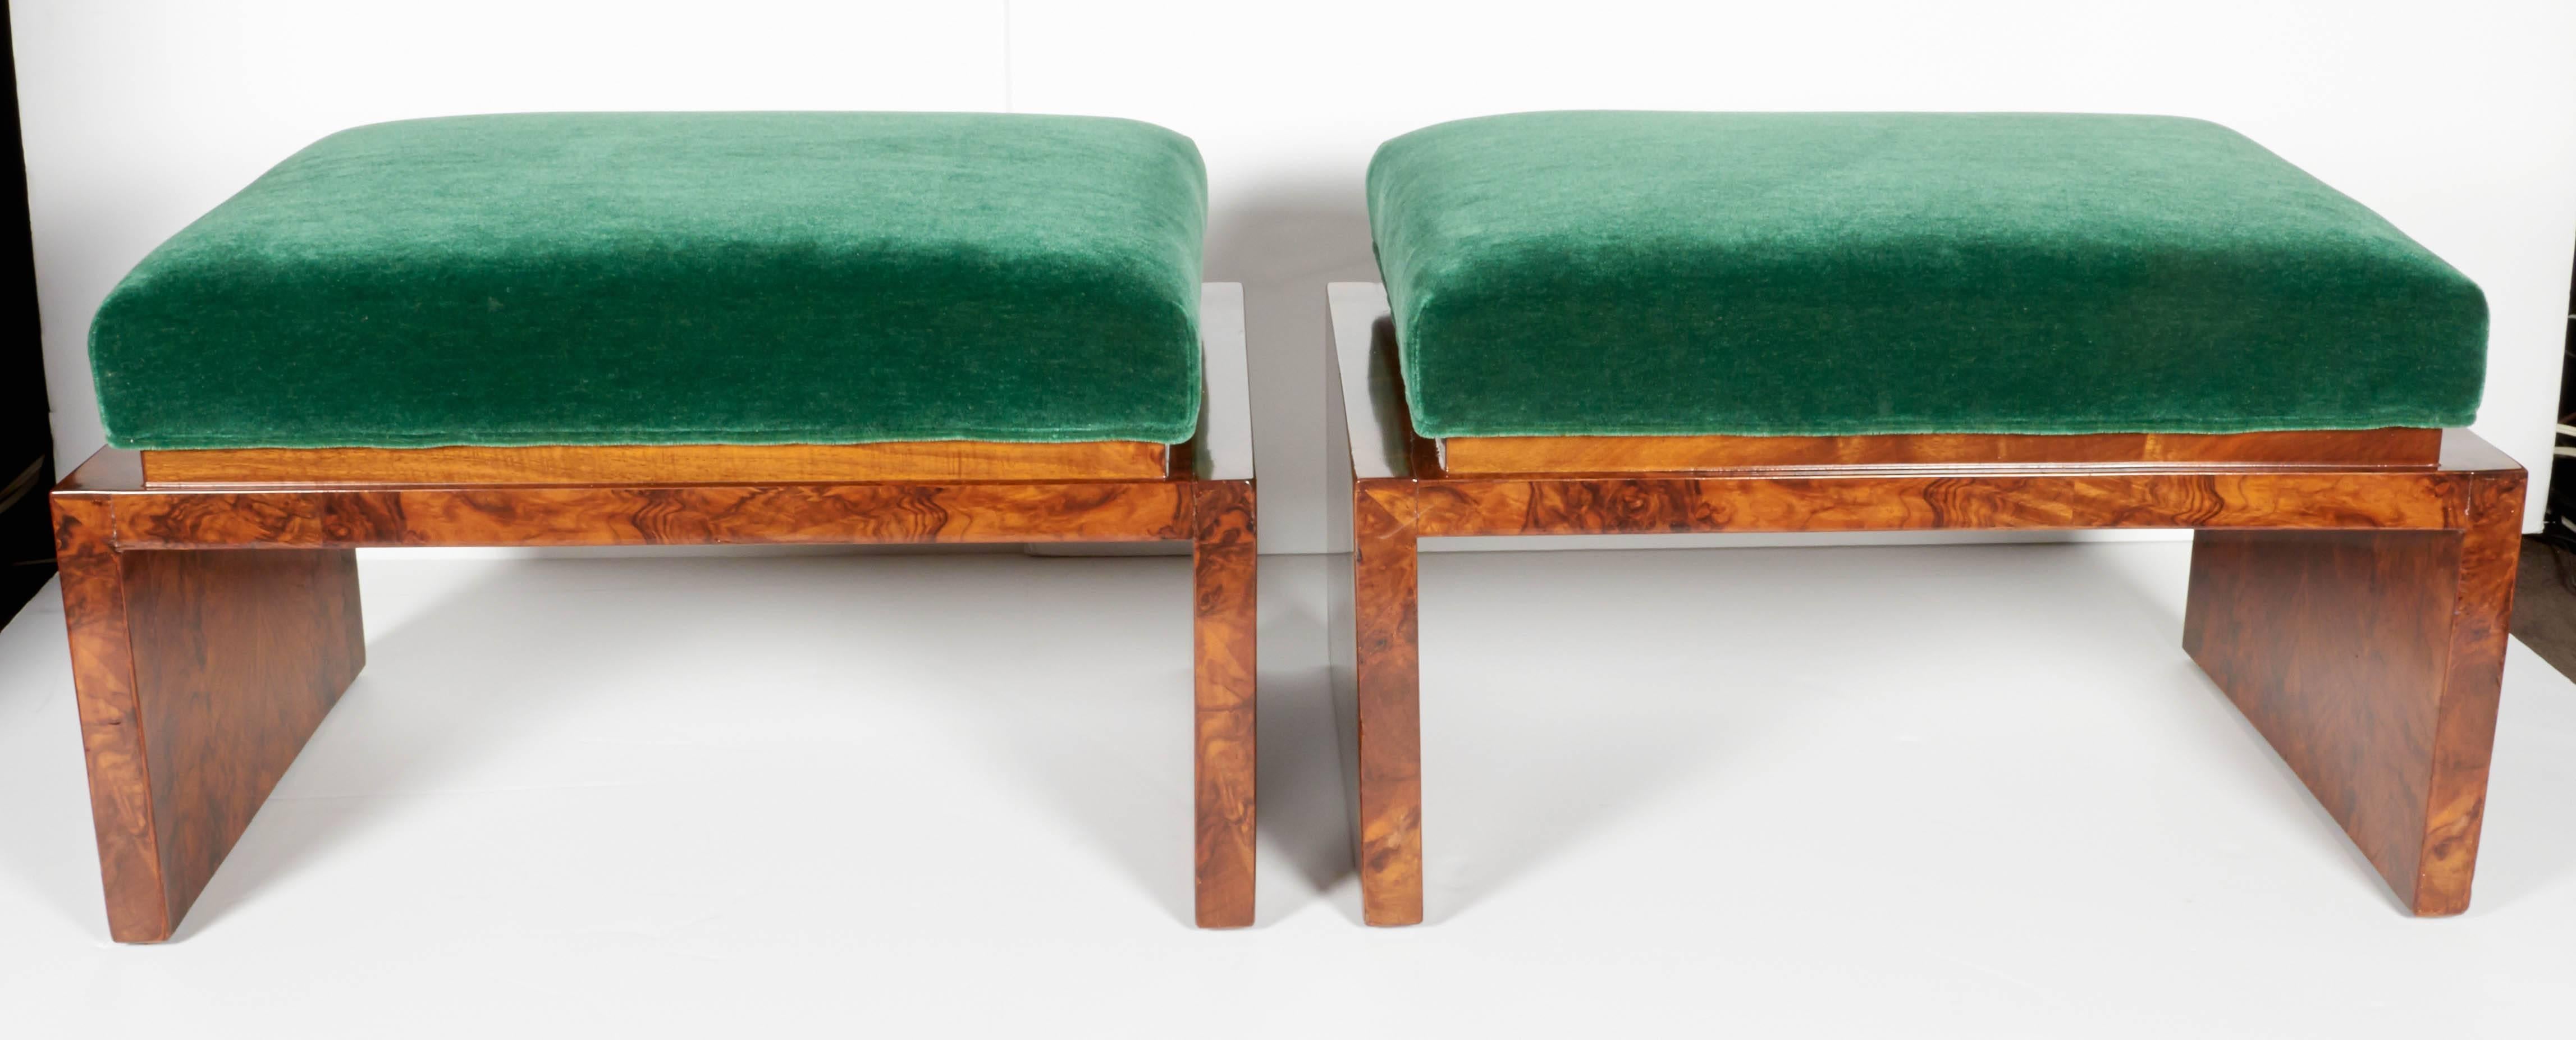 English Rare Art Deco Low Benches in Emerald Mohair and Burled Carpathian Elm